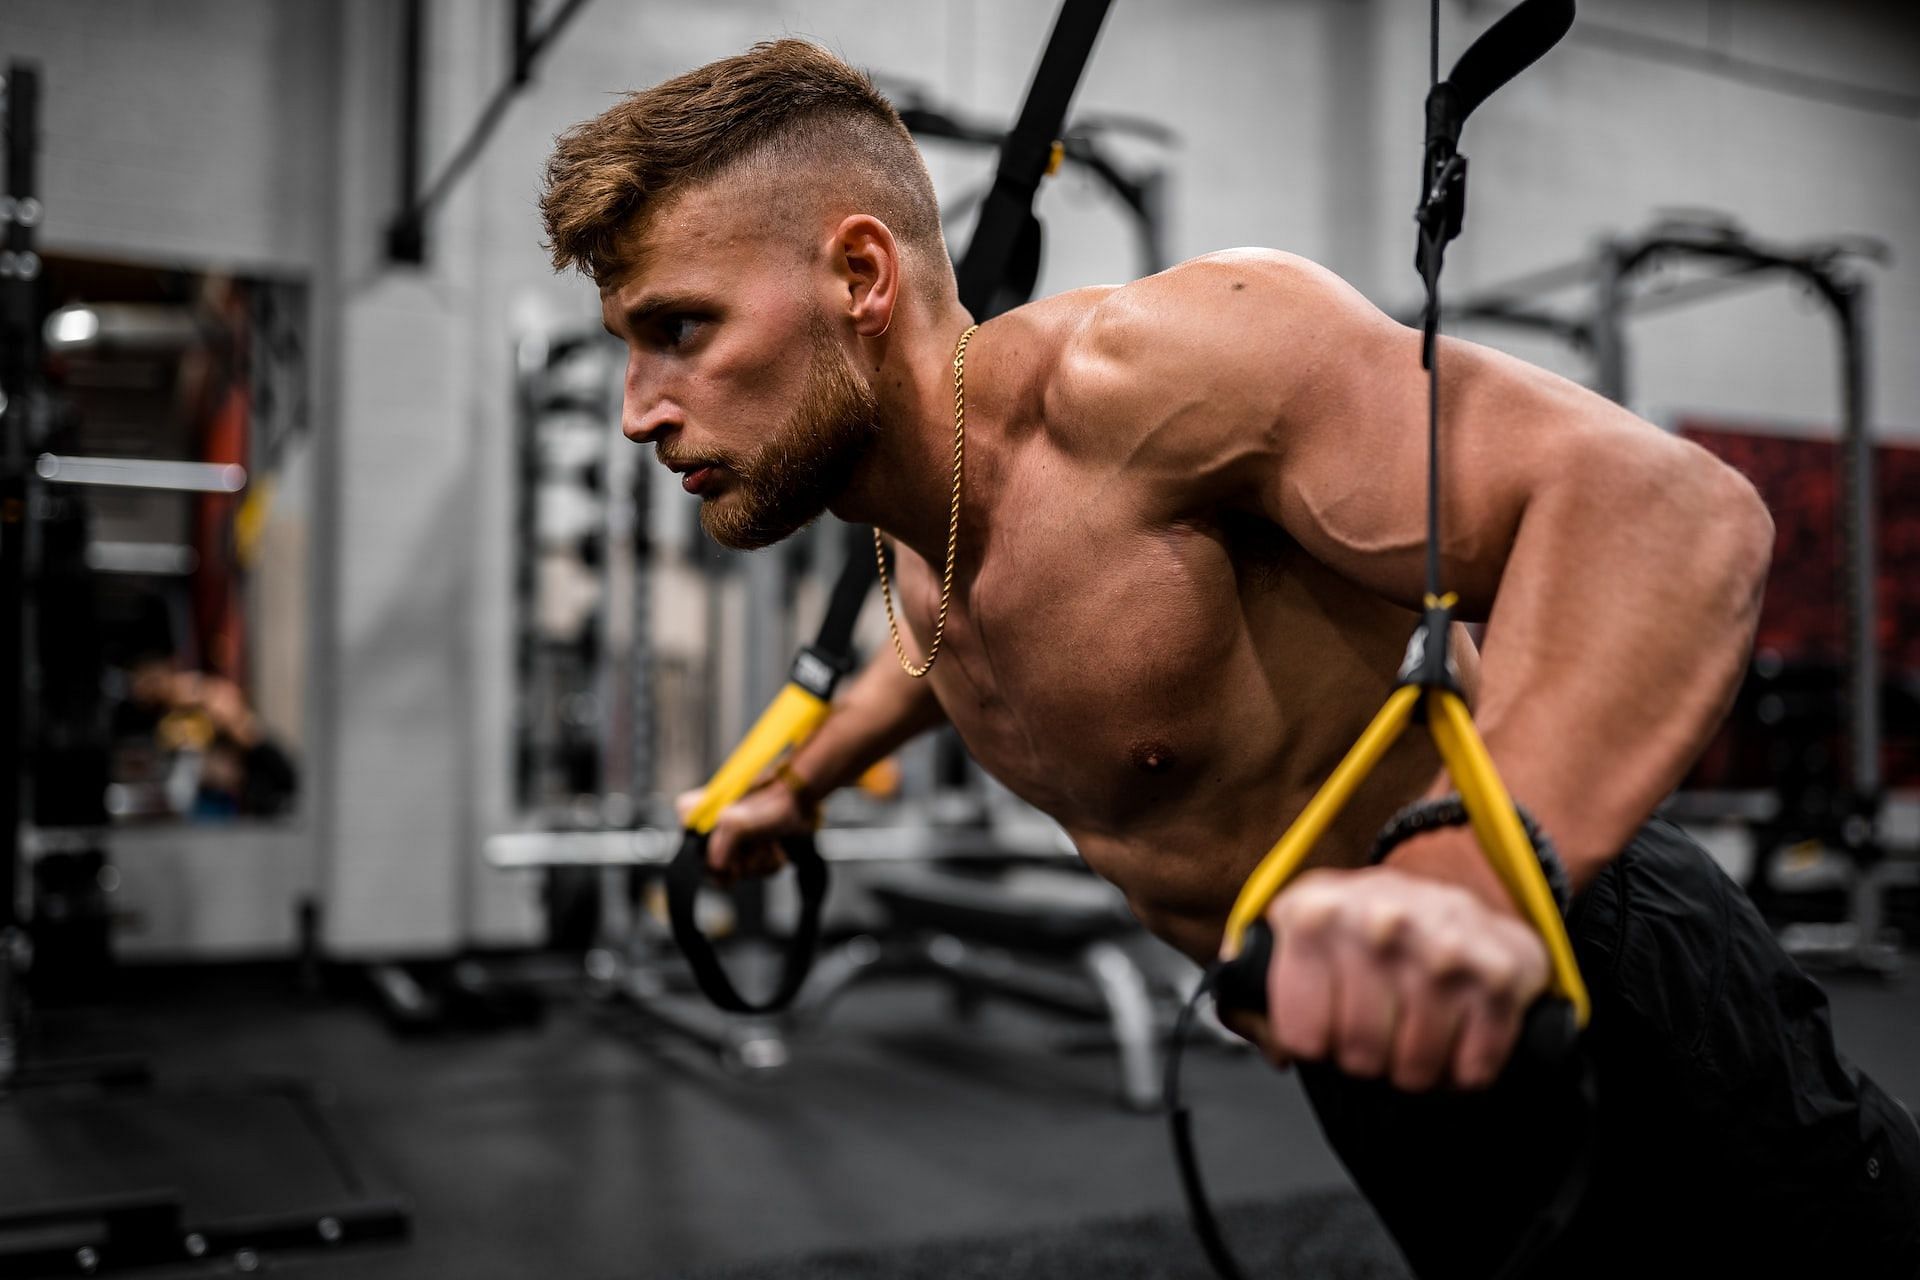 How to build muscle? (Photo by Anastase Maragos on Unsplash)